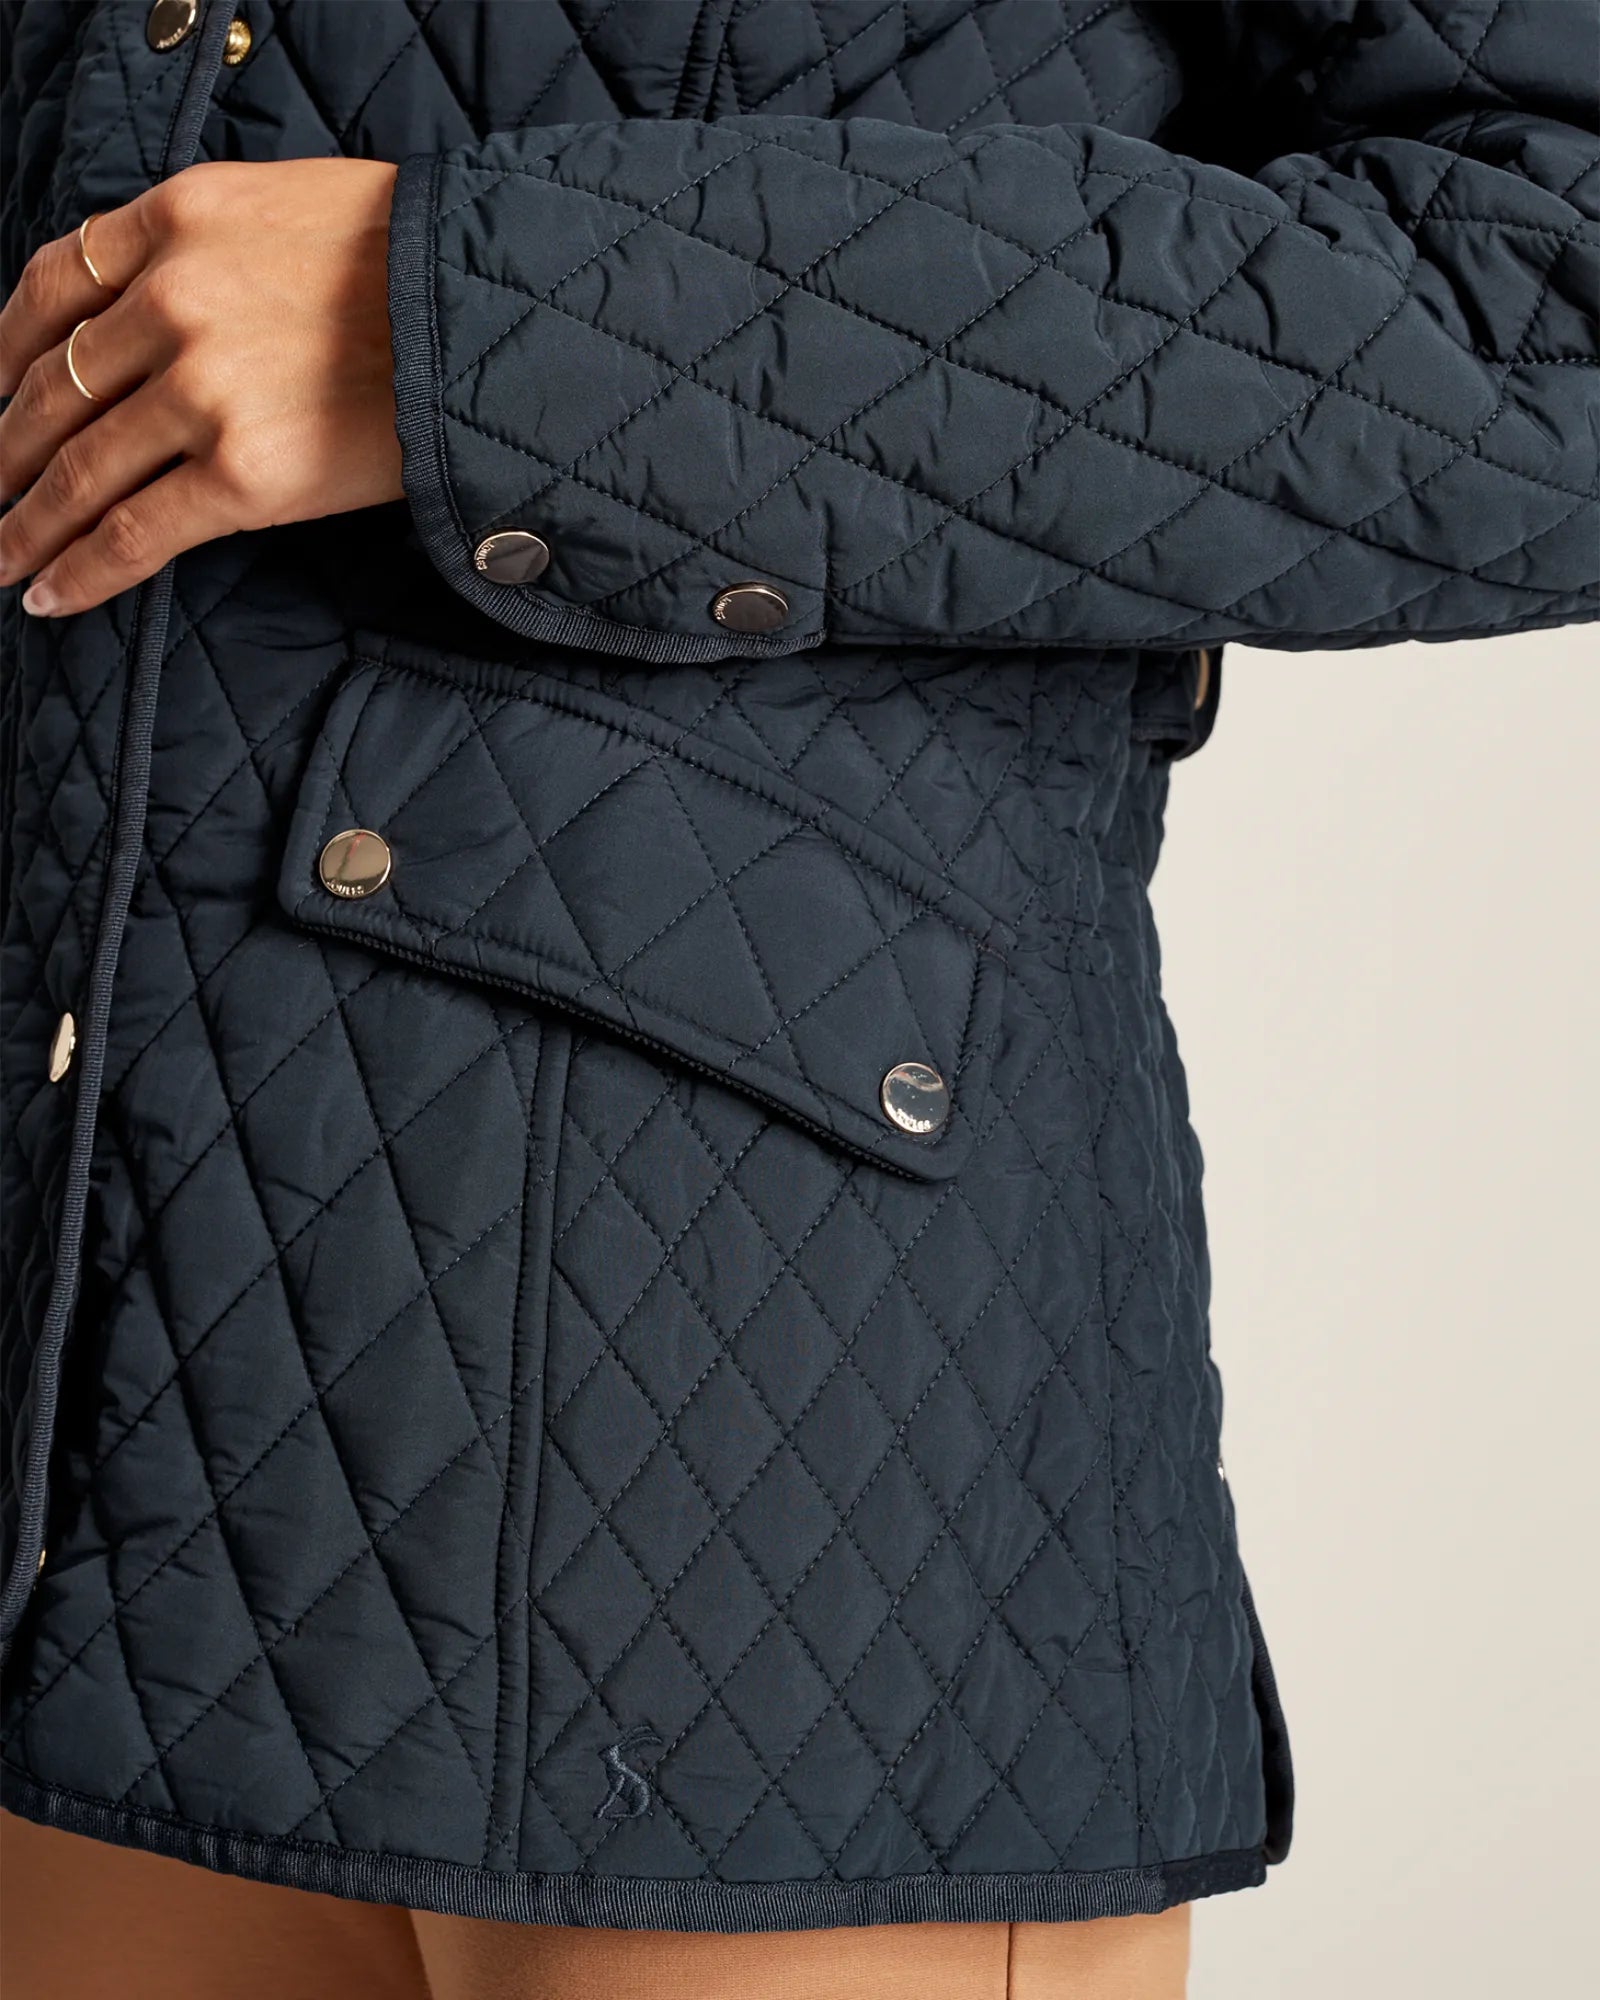 Allendale Navy Quilted Jacket